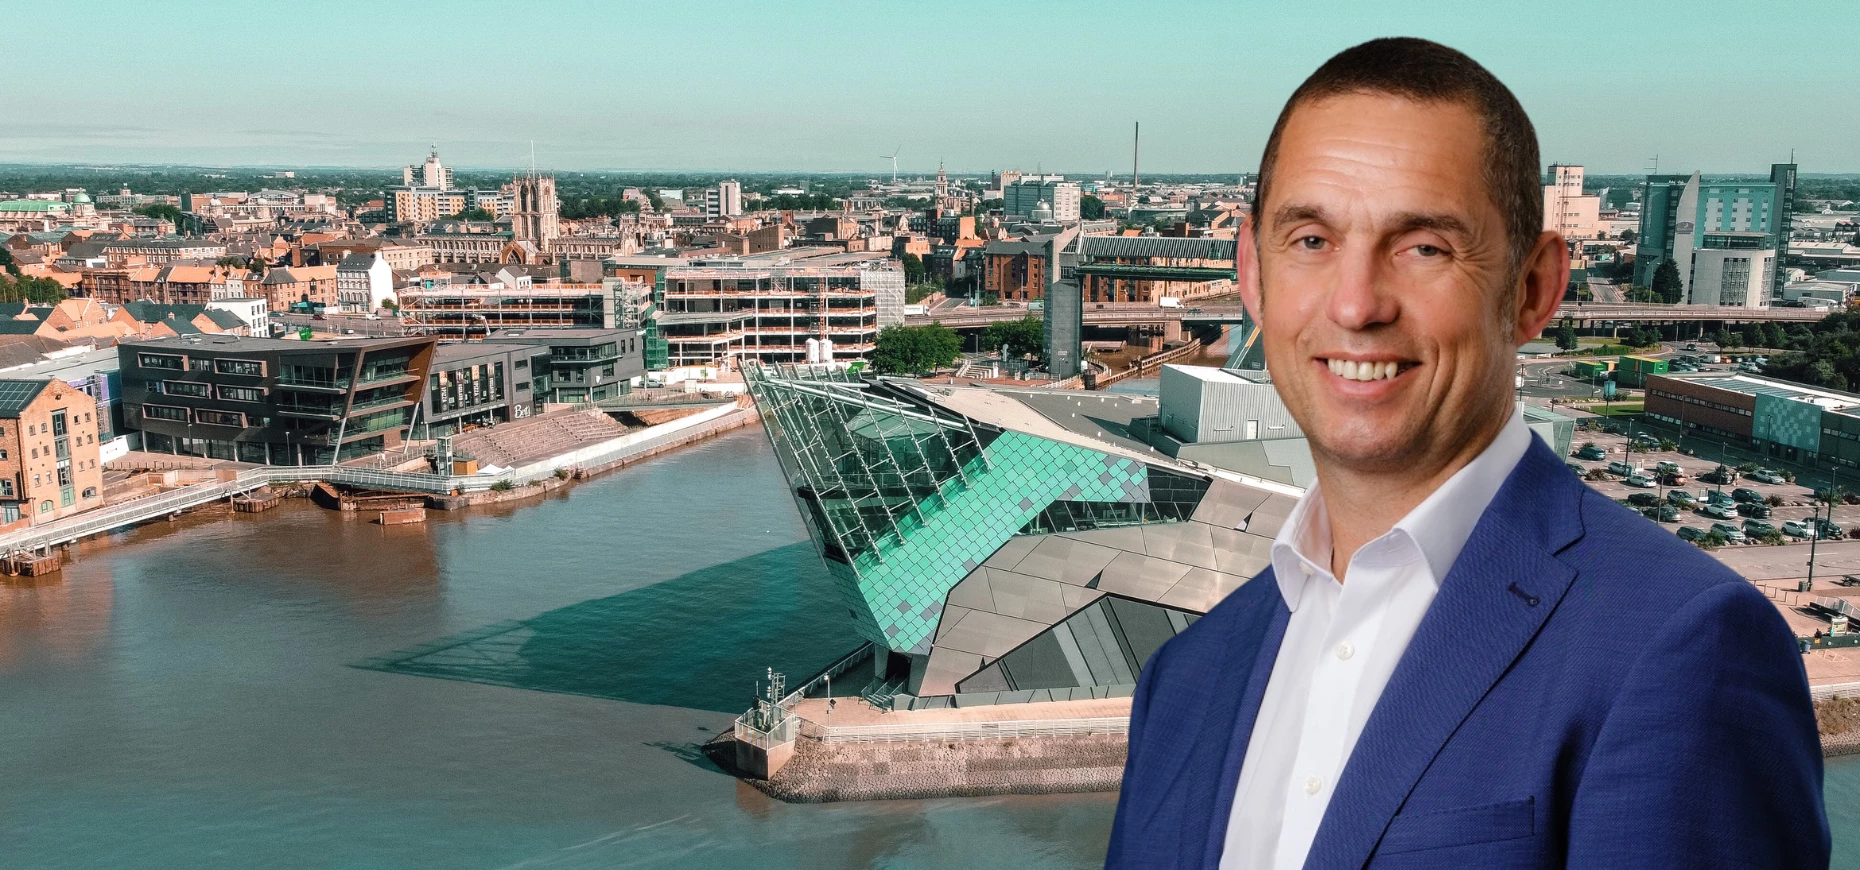 David Garness, managing director of the Garness Group, pictured against the Hull skyline.